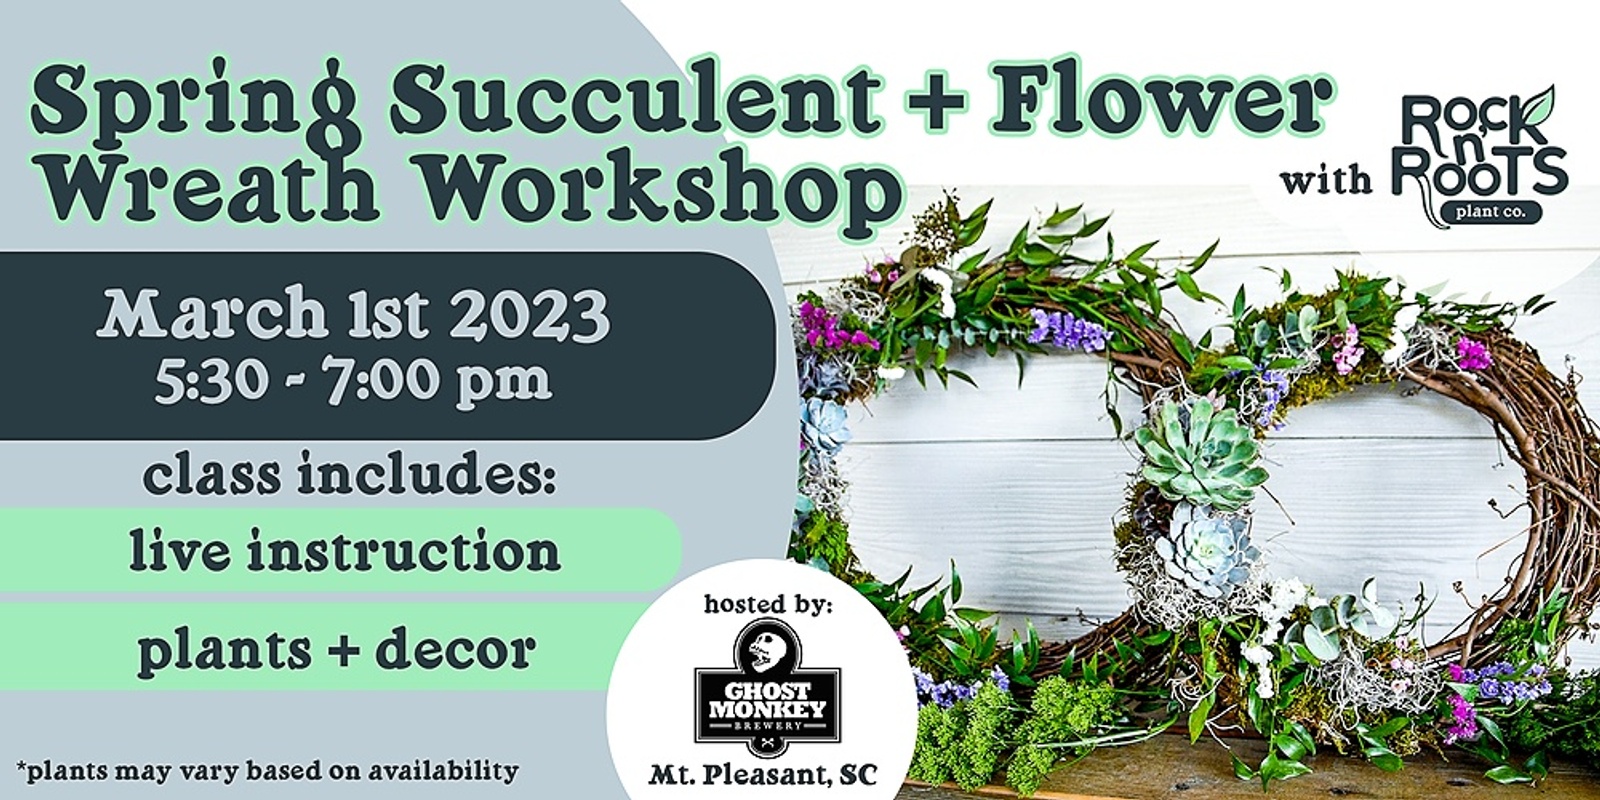 Banner image for Spring Succulent + Flower Wreath Workshop at Ghost Monkey Brewery (Mount Pleasant, SC)